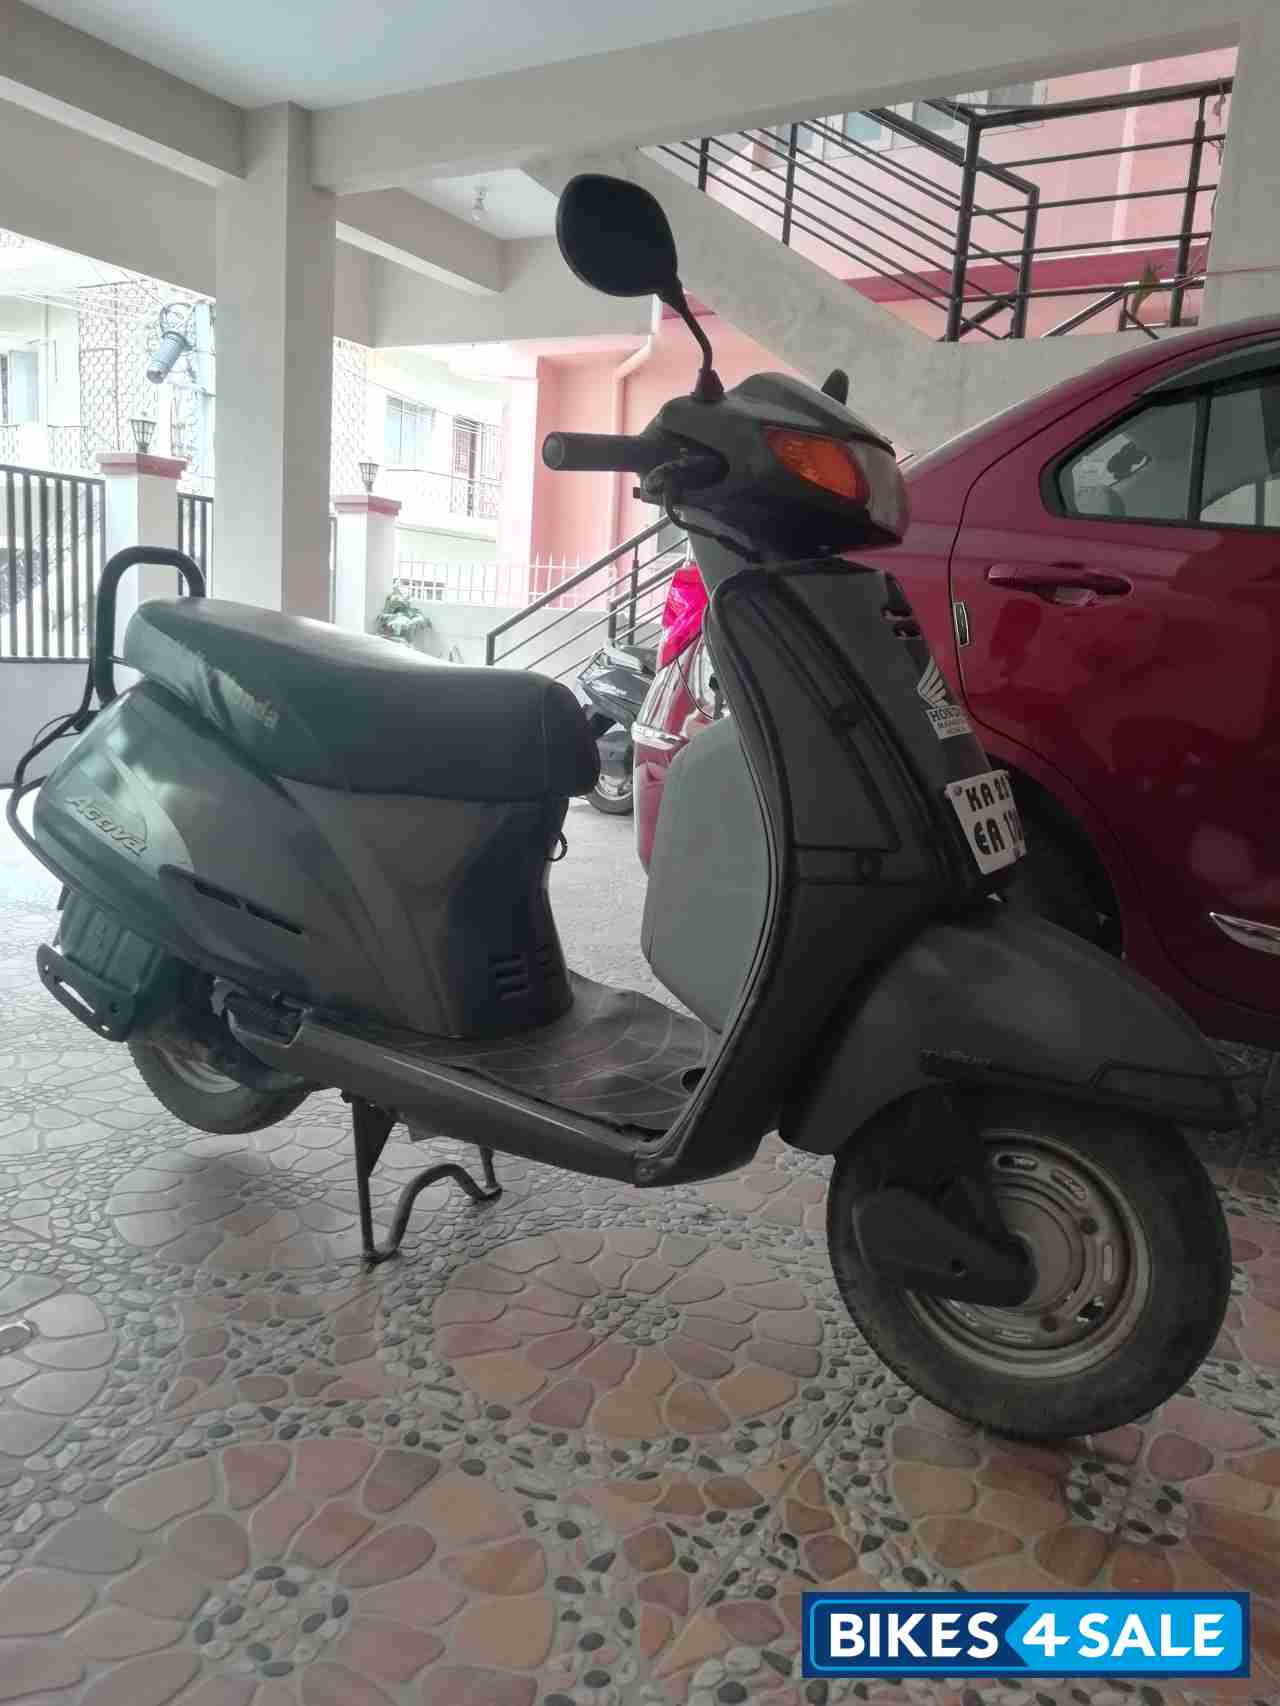 Used 2007 model Honda Activa for sale in Bangalore. ID ...